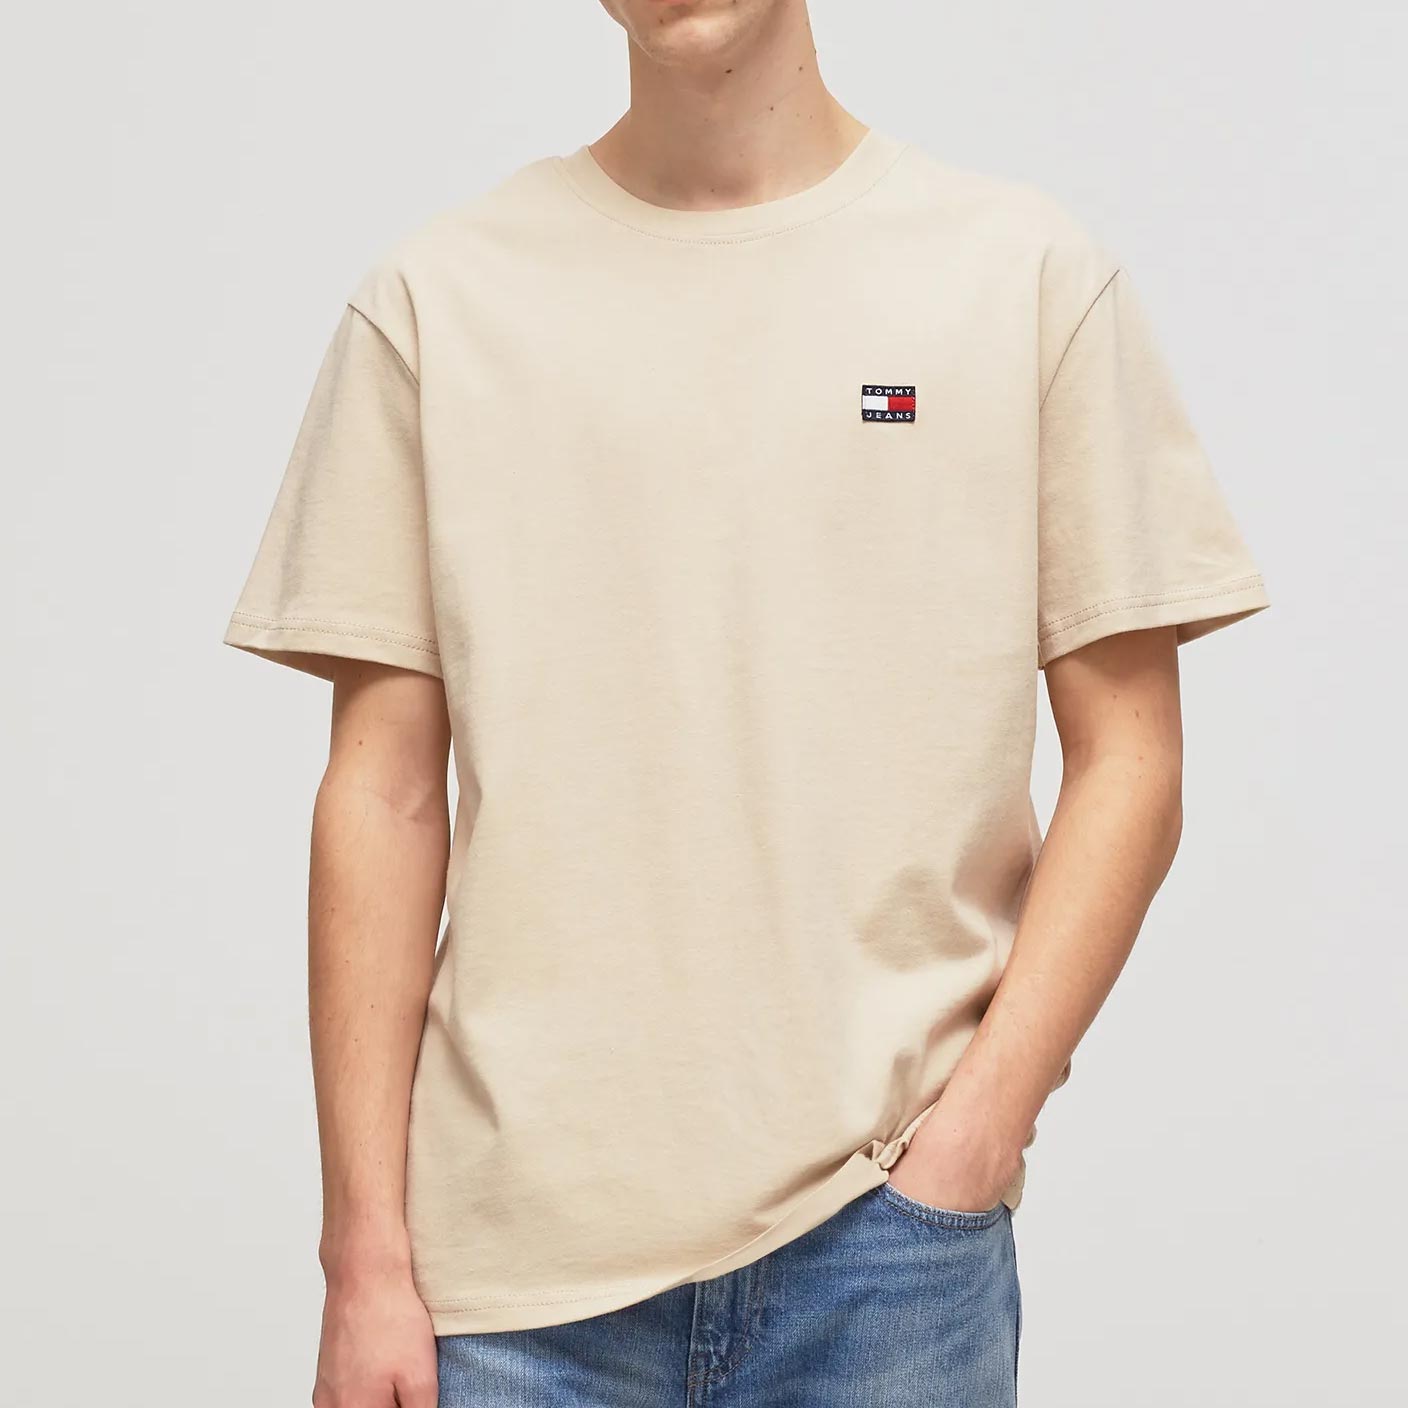 Tommy Jeans Classic Tommy XS Badge Tee - Classic Beige